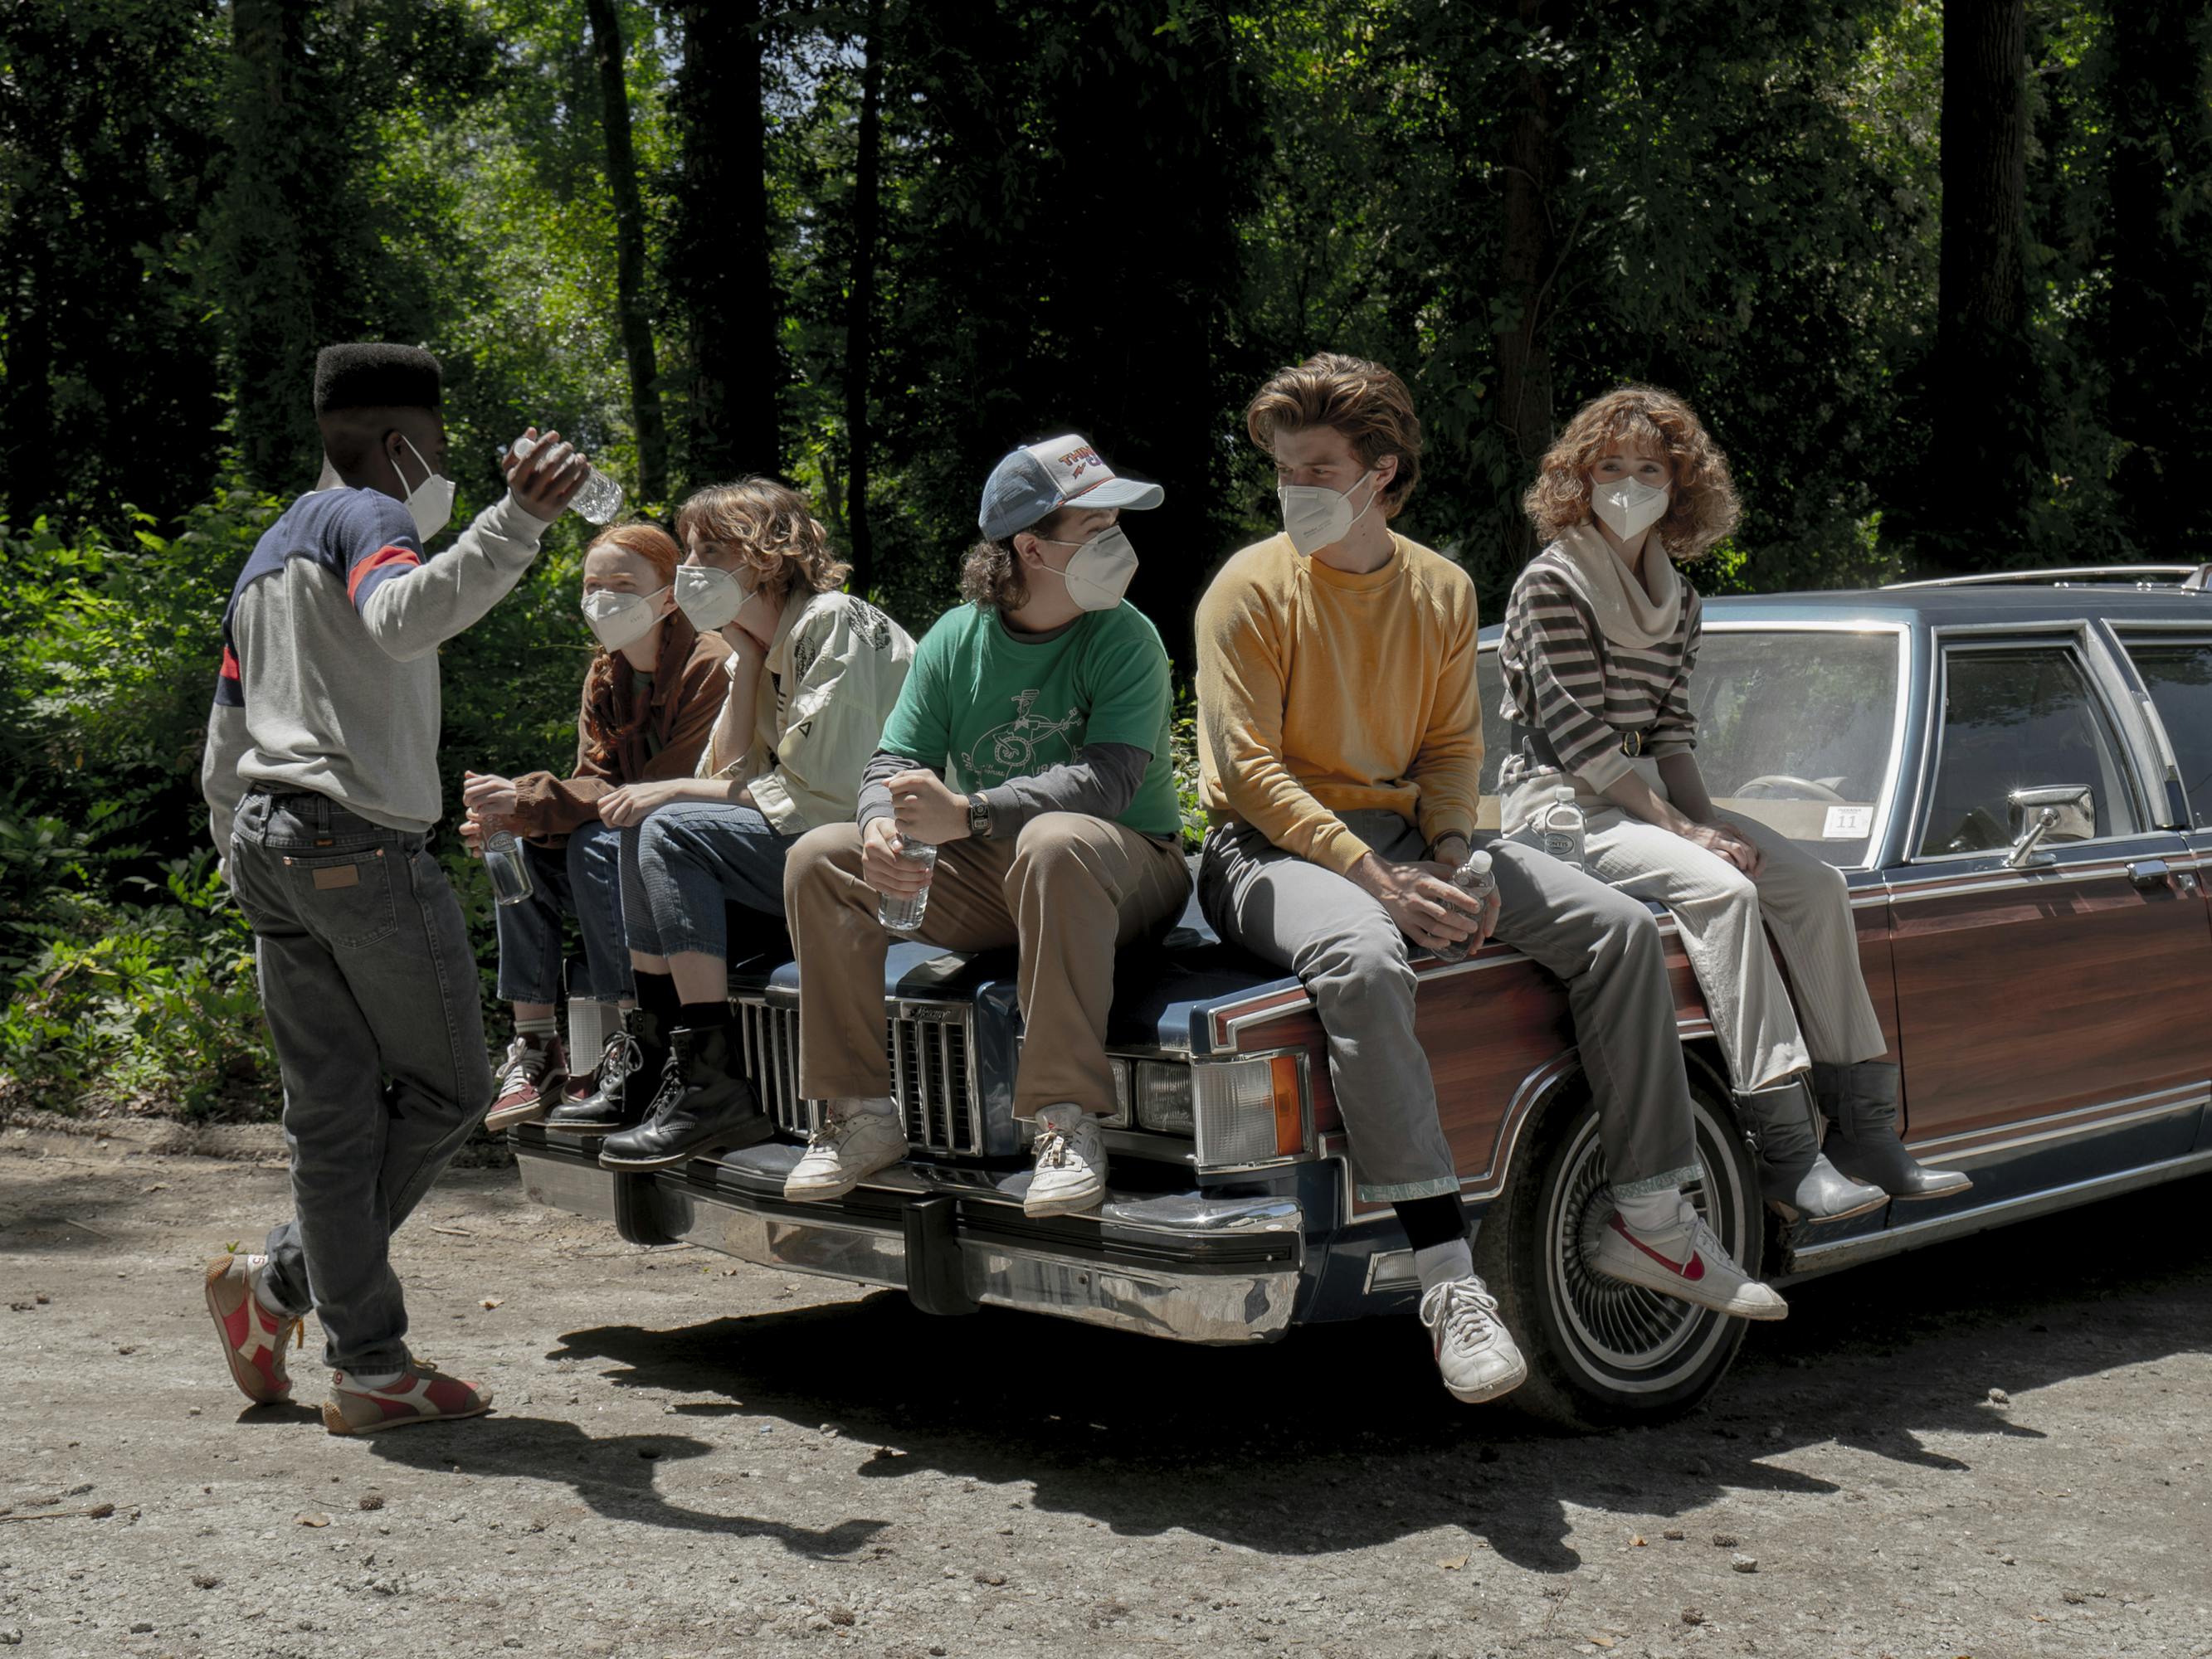 The Stranger Things cast hangs out on an old car.